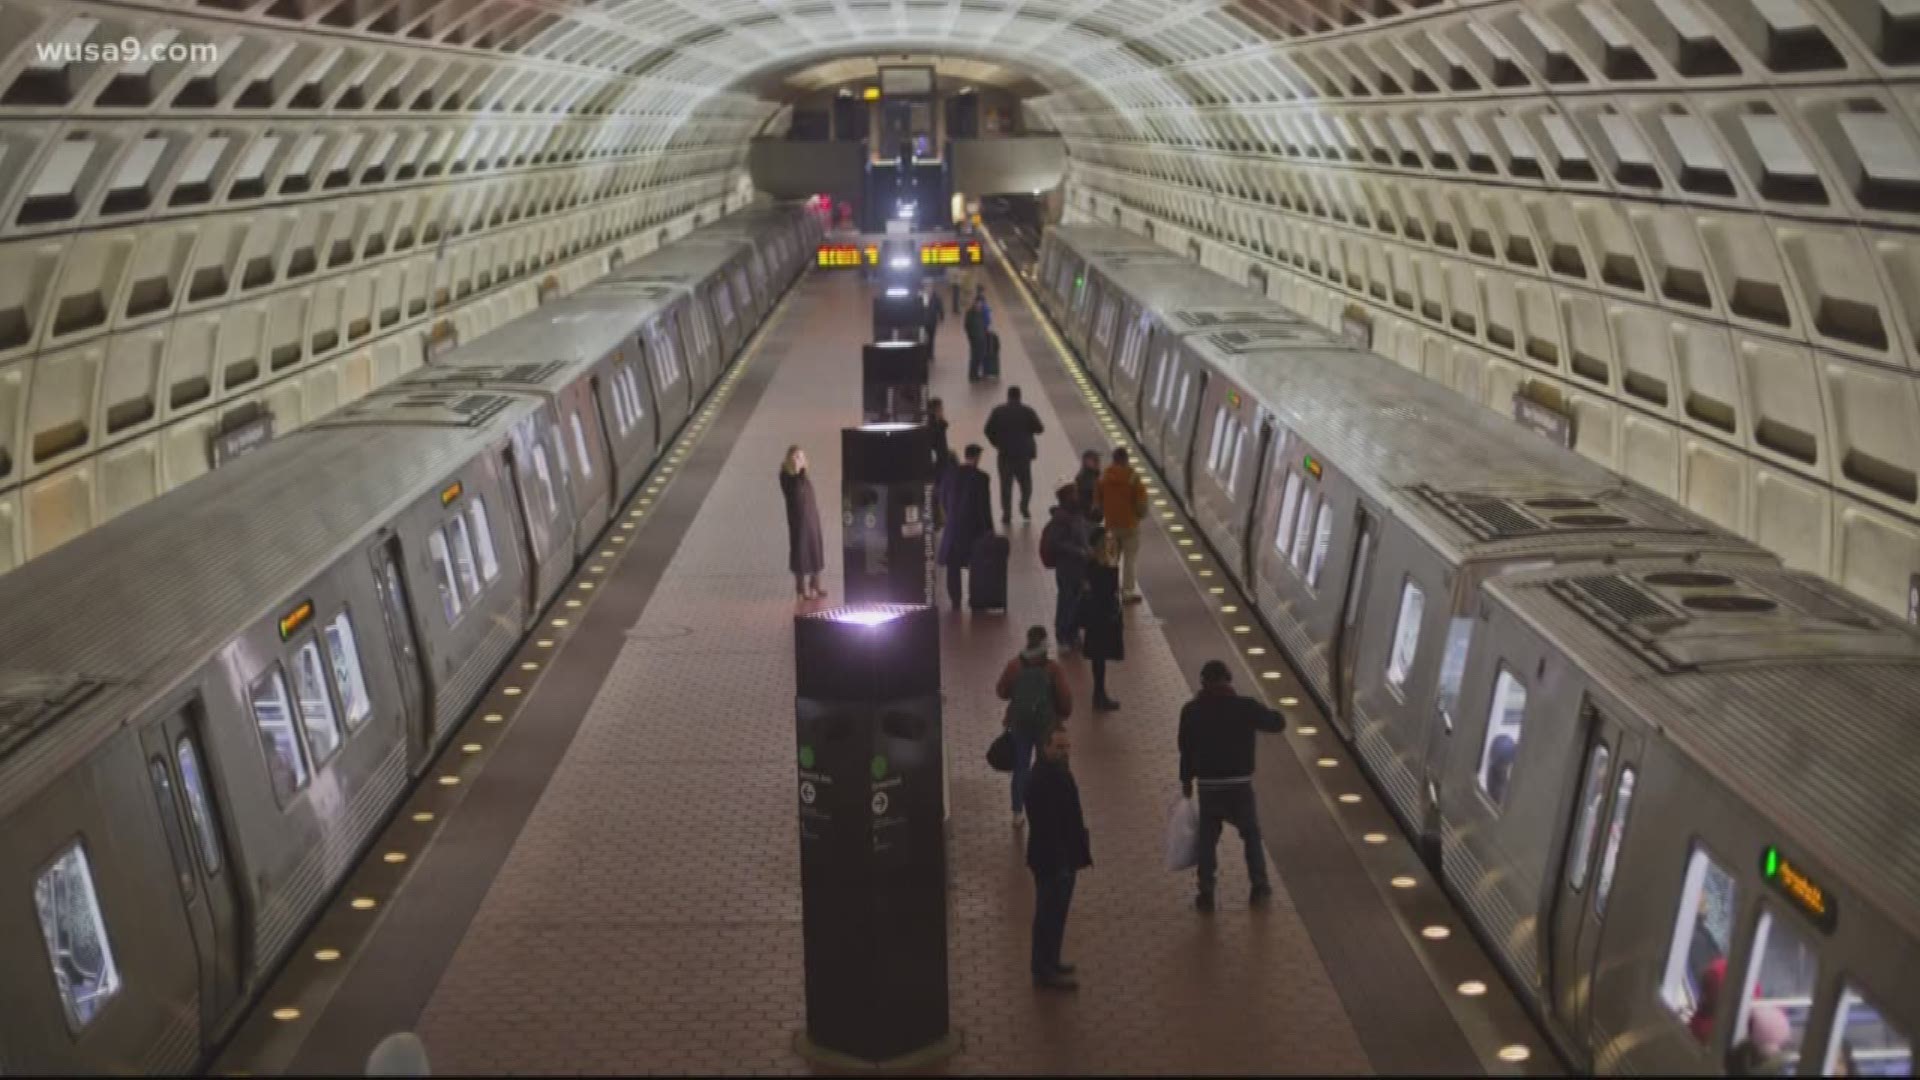 With 600,000 daily riders passing through 91 stations, Metro maintains it is "focused on preparedness" for Coronavirus.